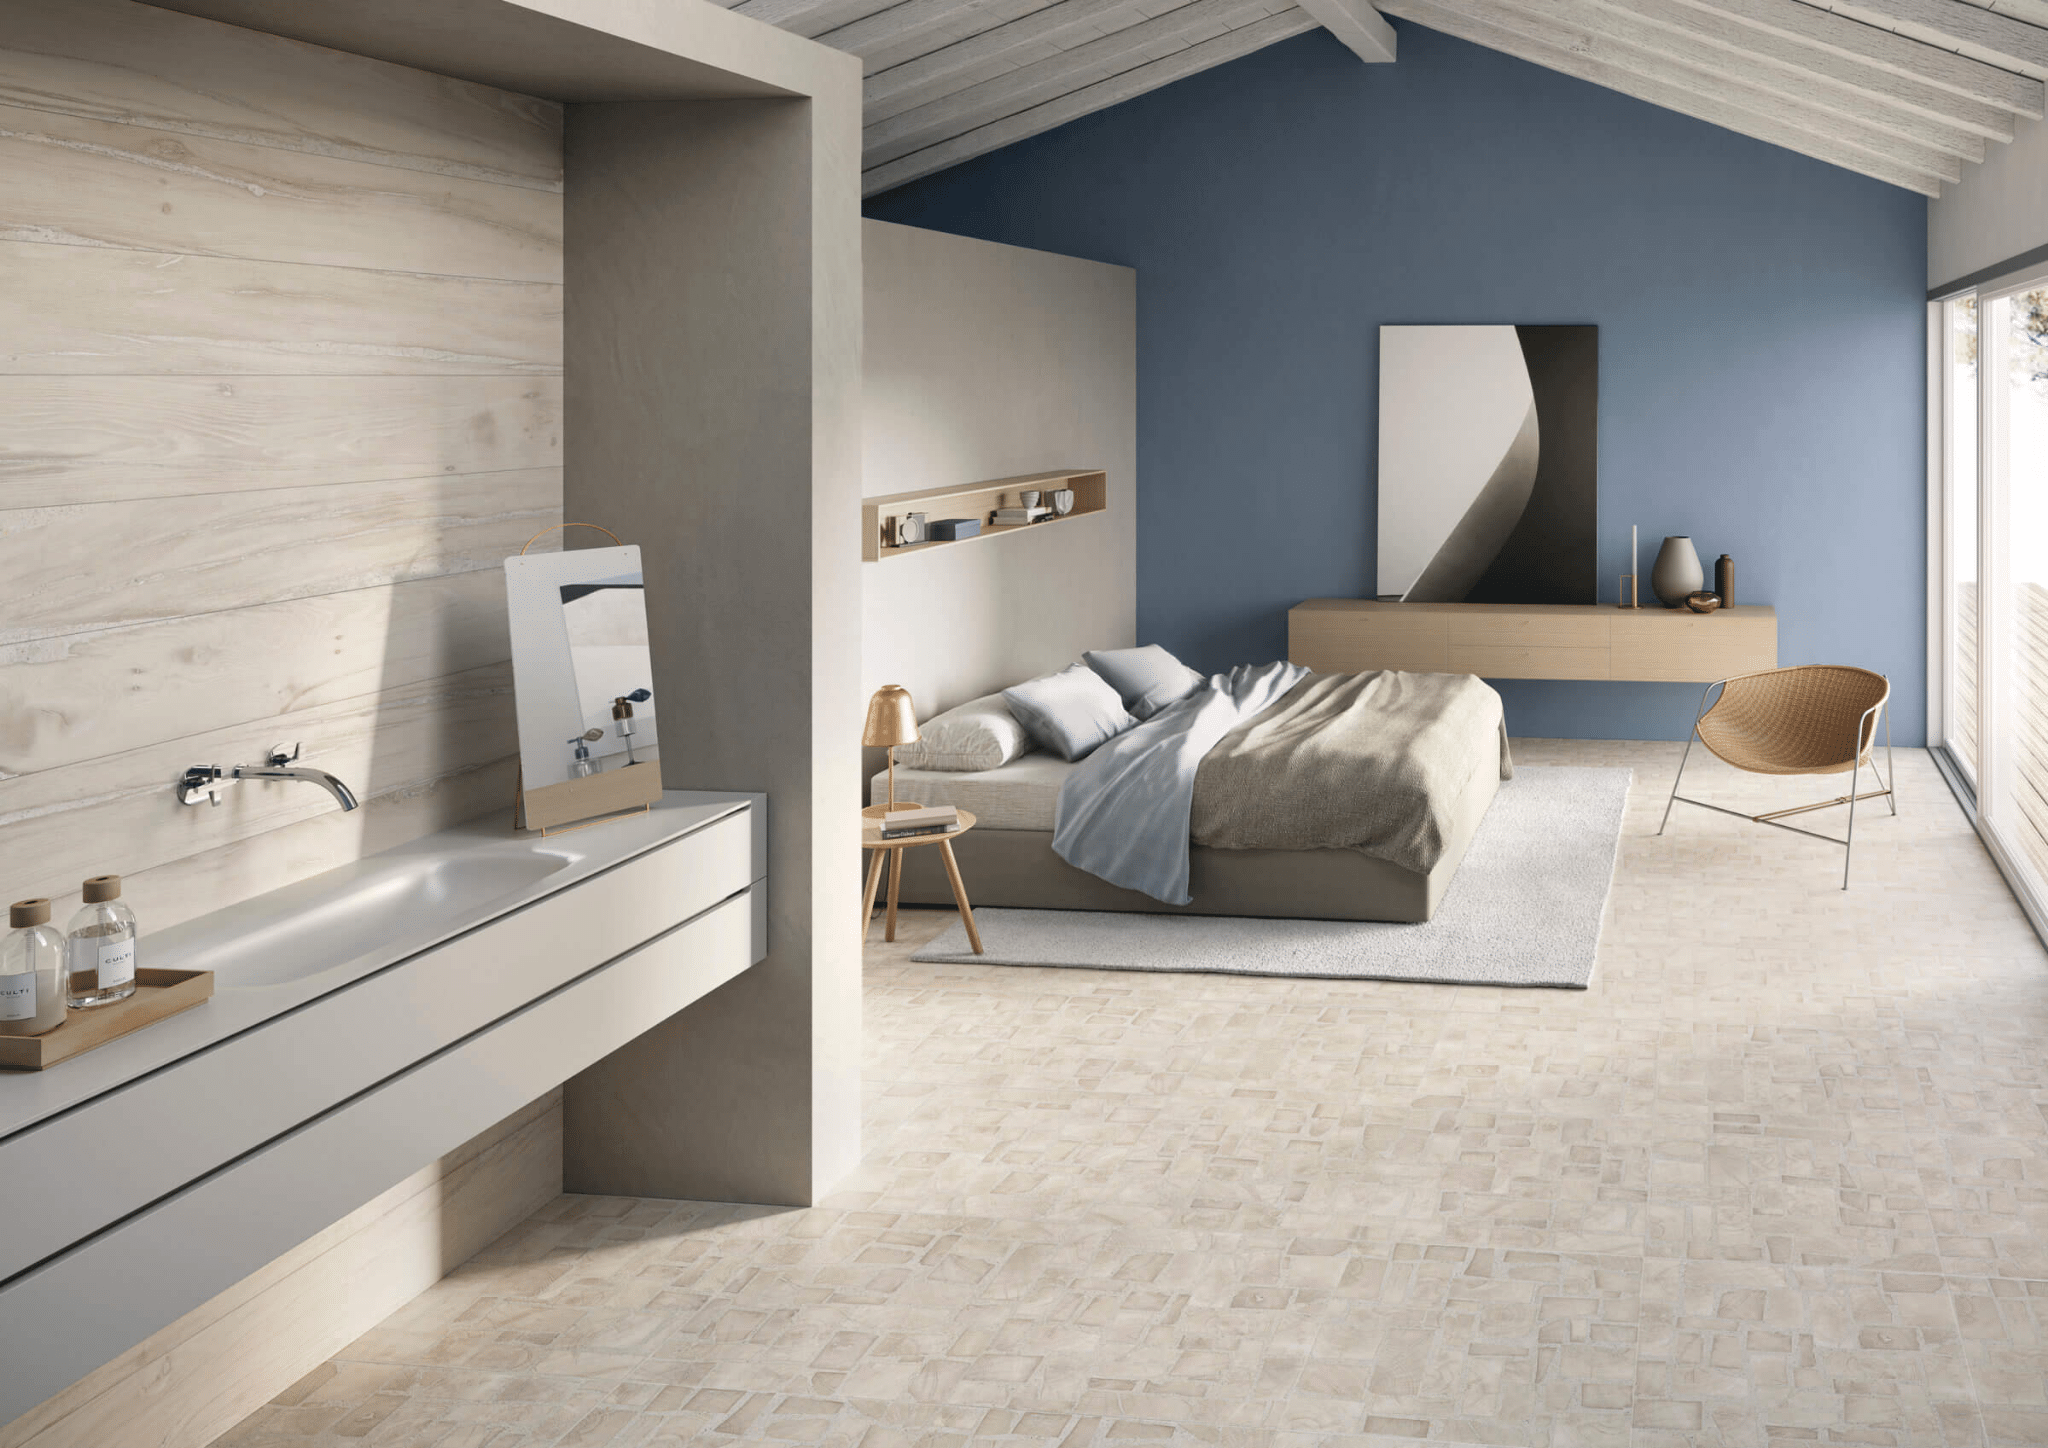 Bedroom with light wood-look tile flooring and walls